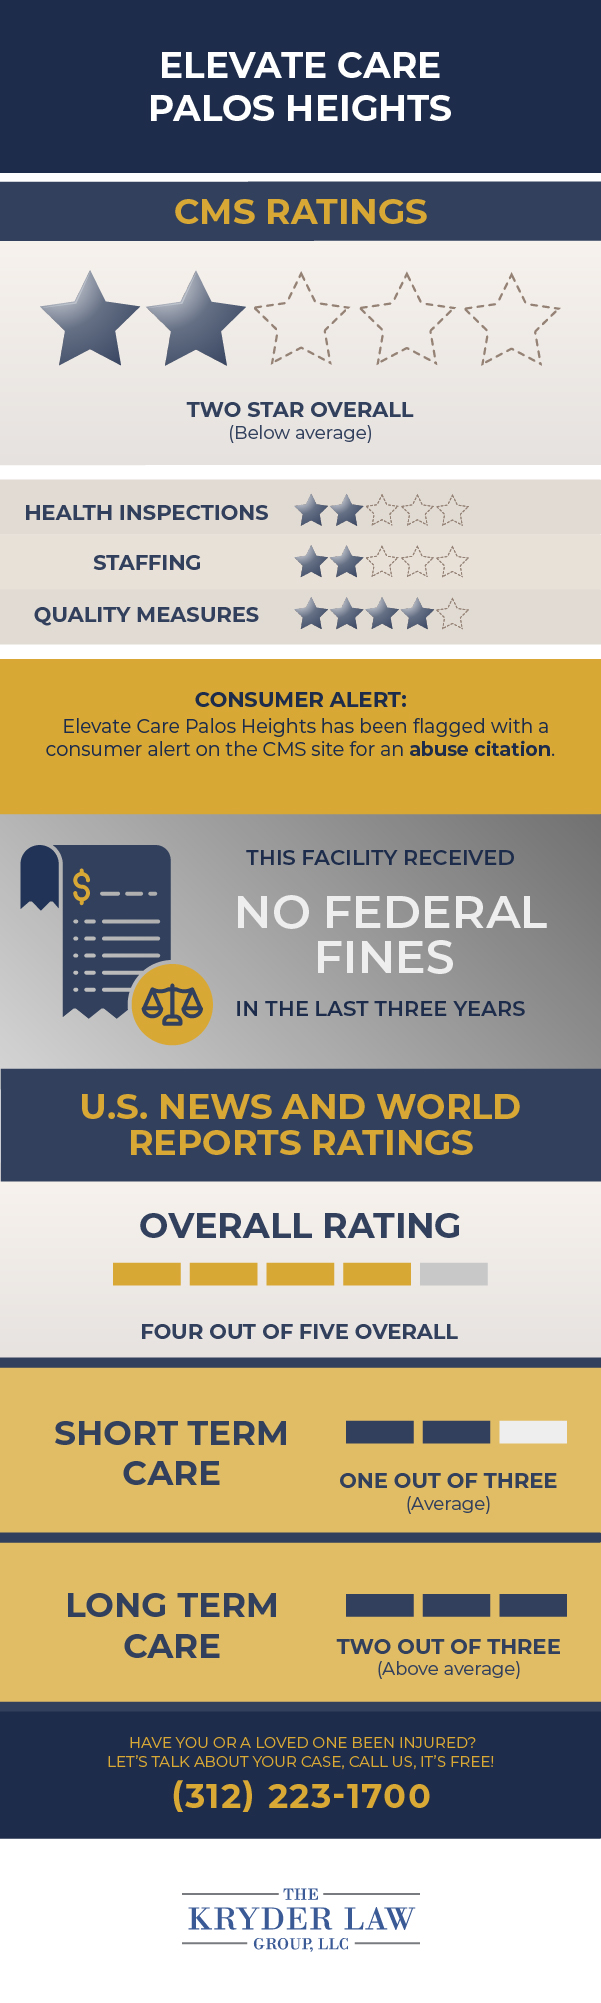 Elevate Care Palos Heights CMS Ratings and U.S. News & World Report Ratings